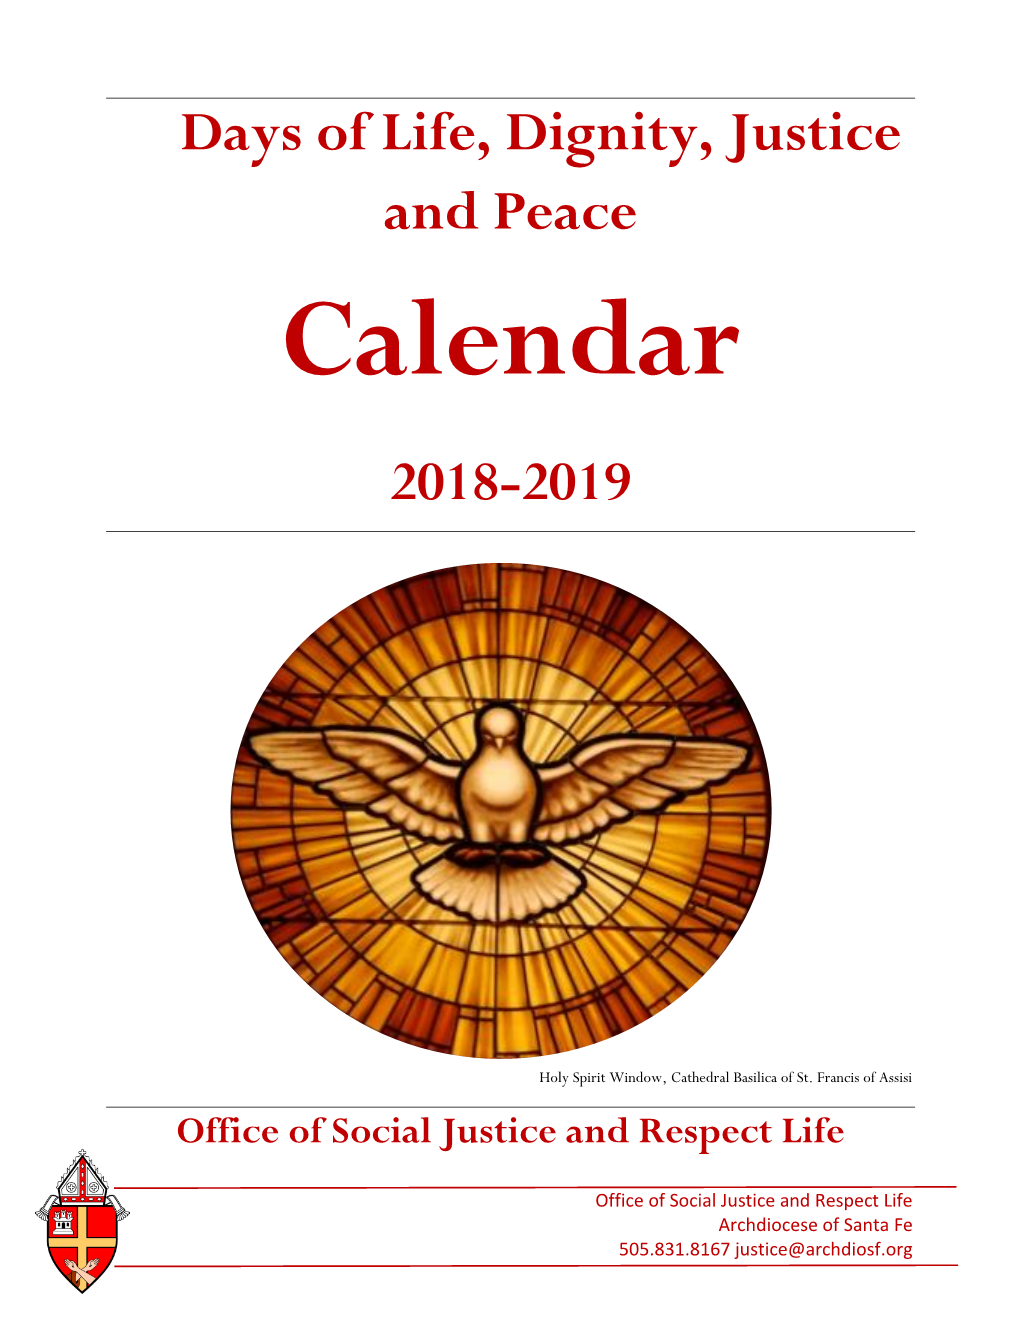 Days of Life, Dignity, Justice and Peace 2018-2019